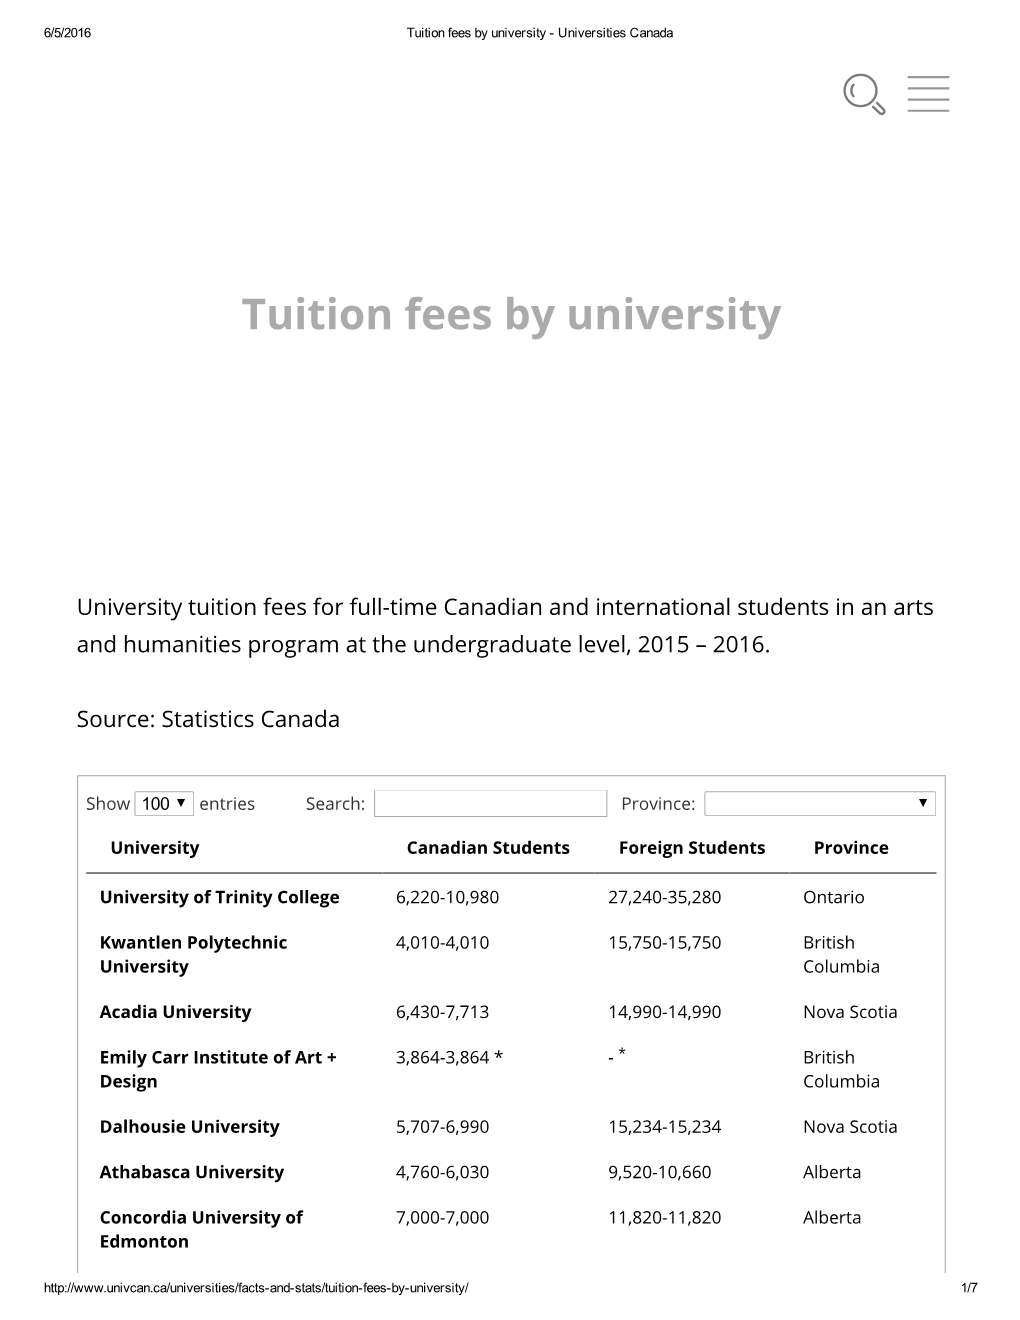 Tuition Fees by University ­ Universities Canada